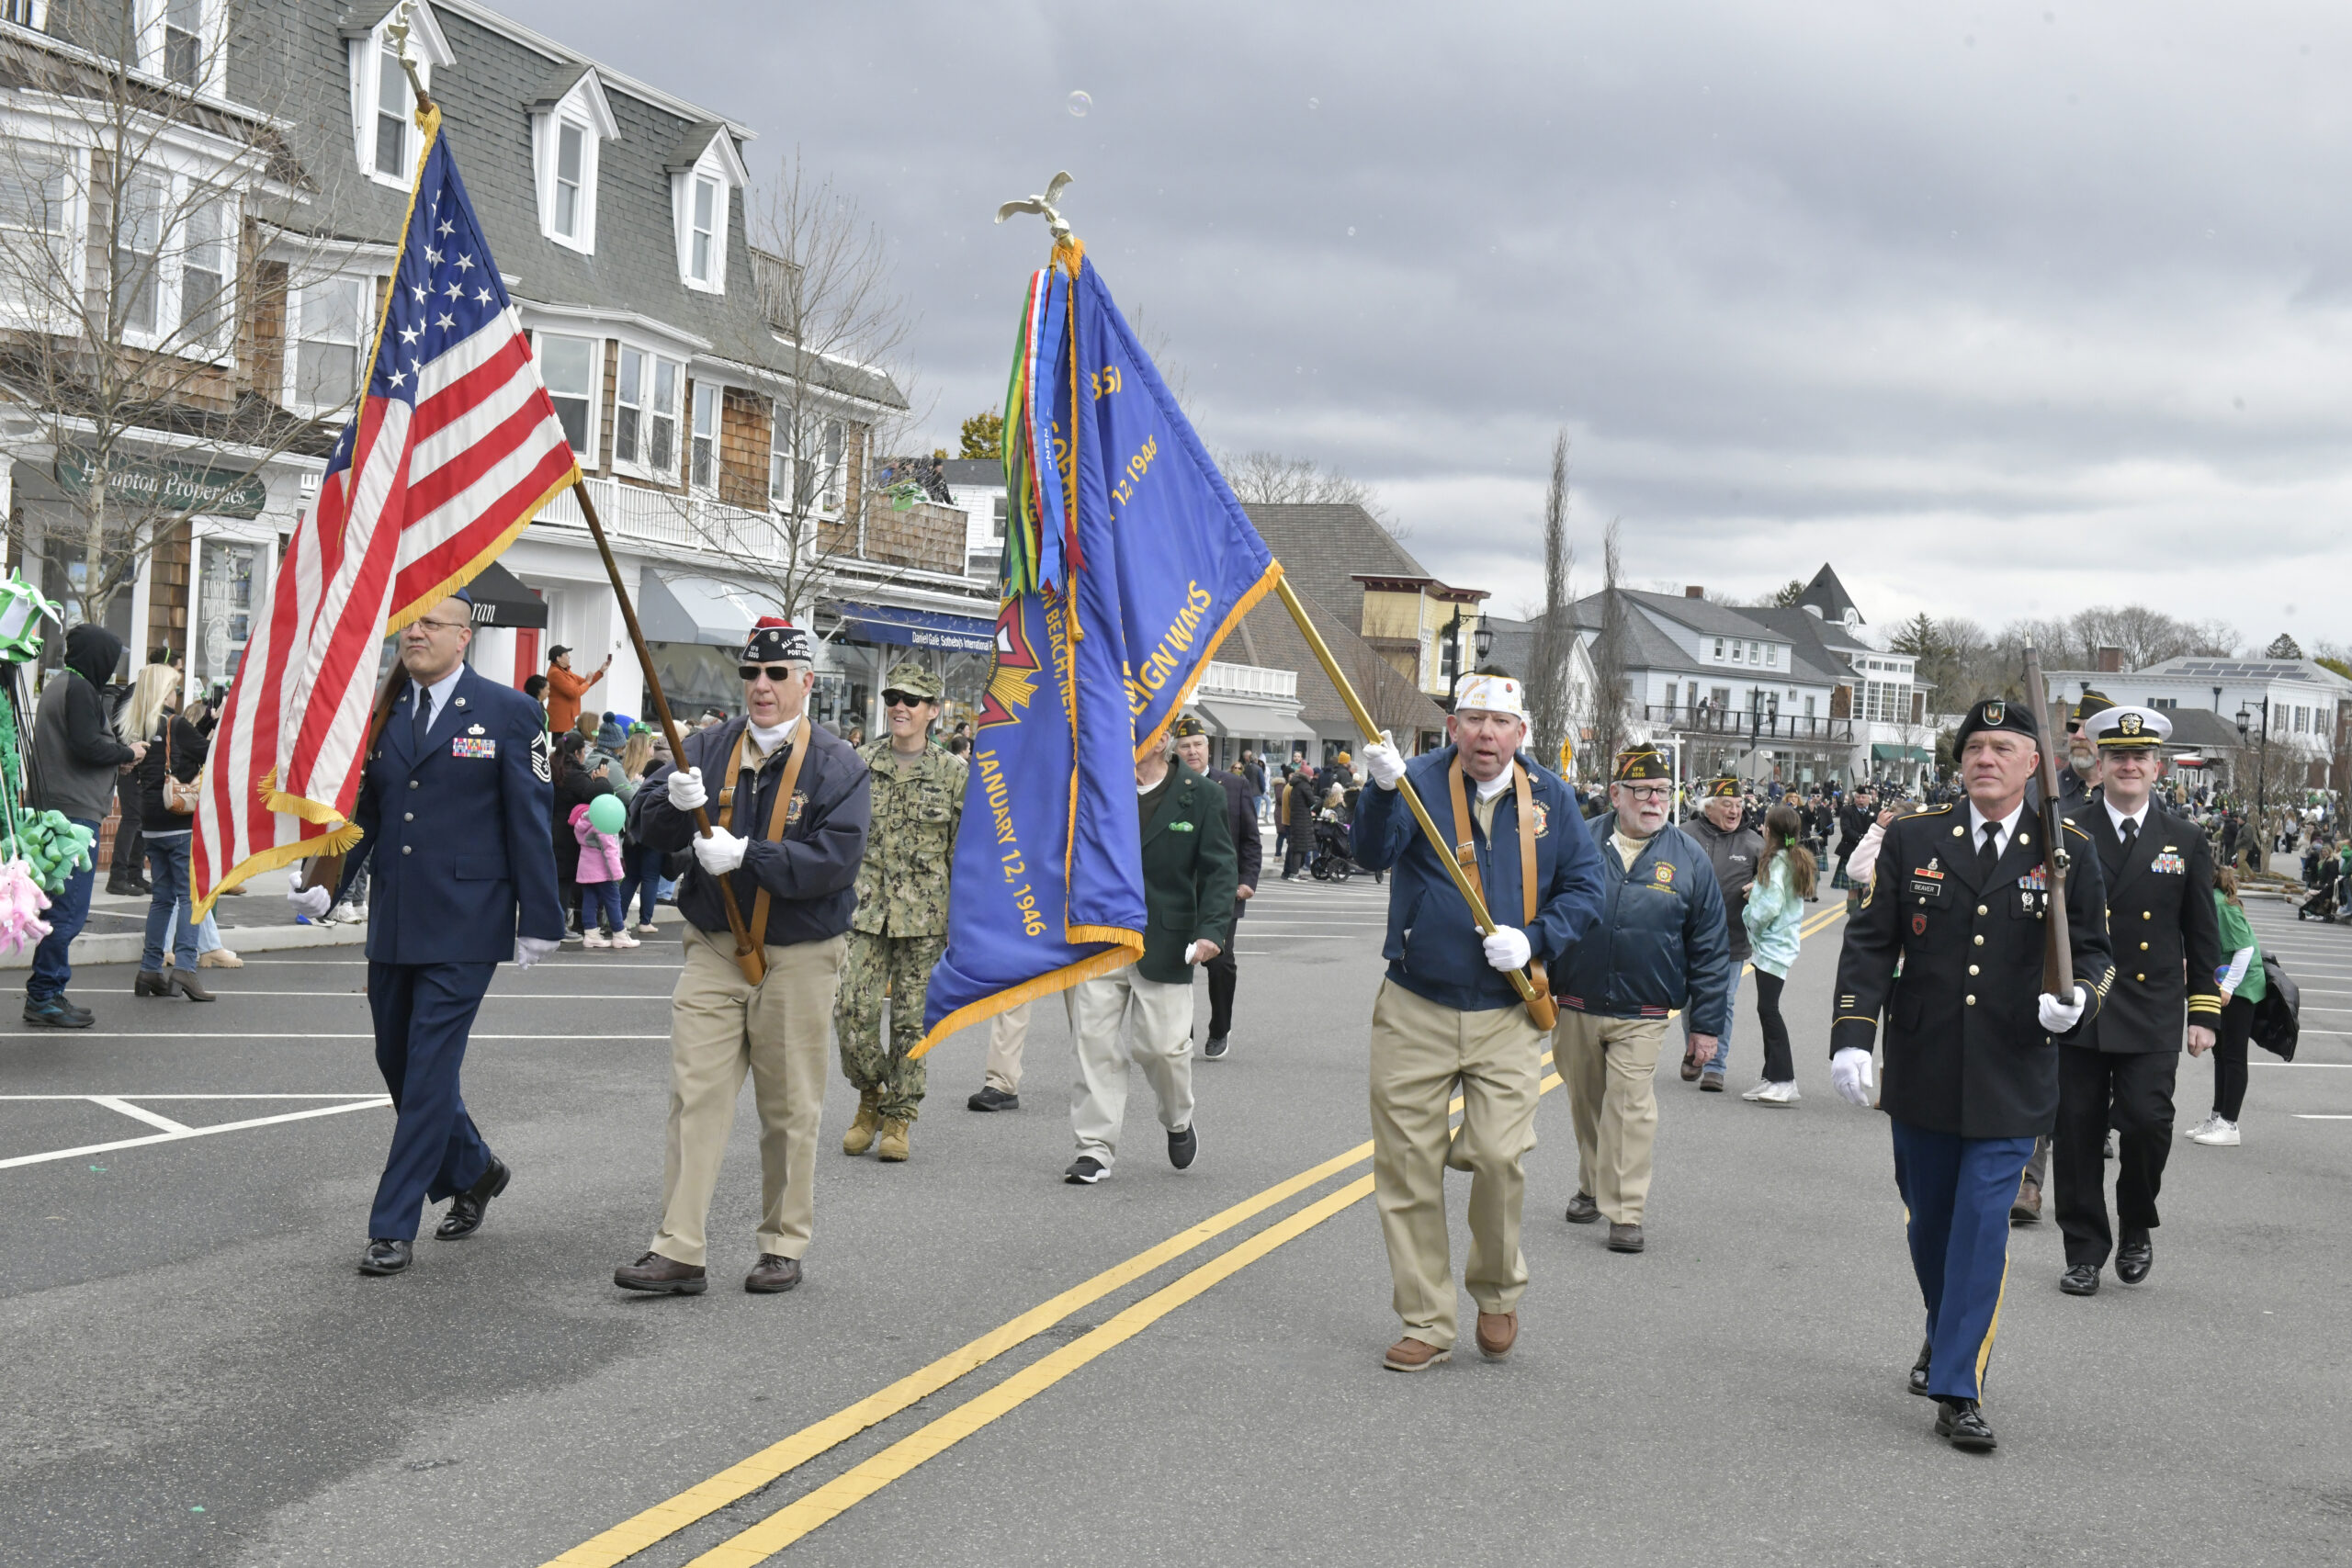 Members of VFW Post 5350 during the parade.